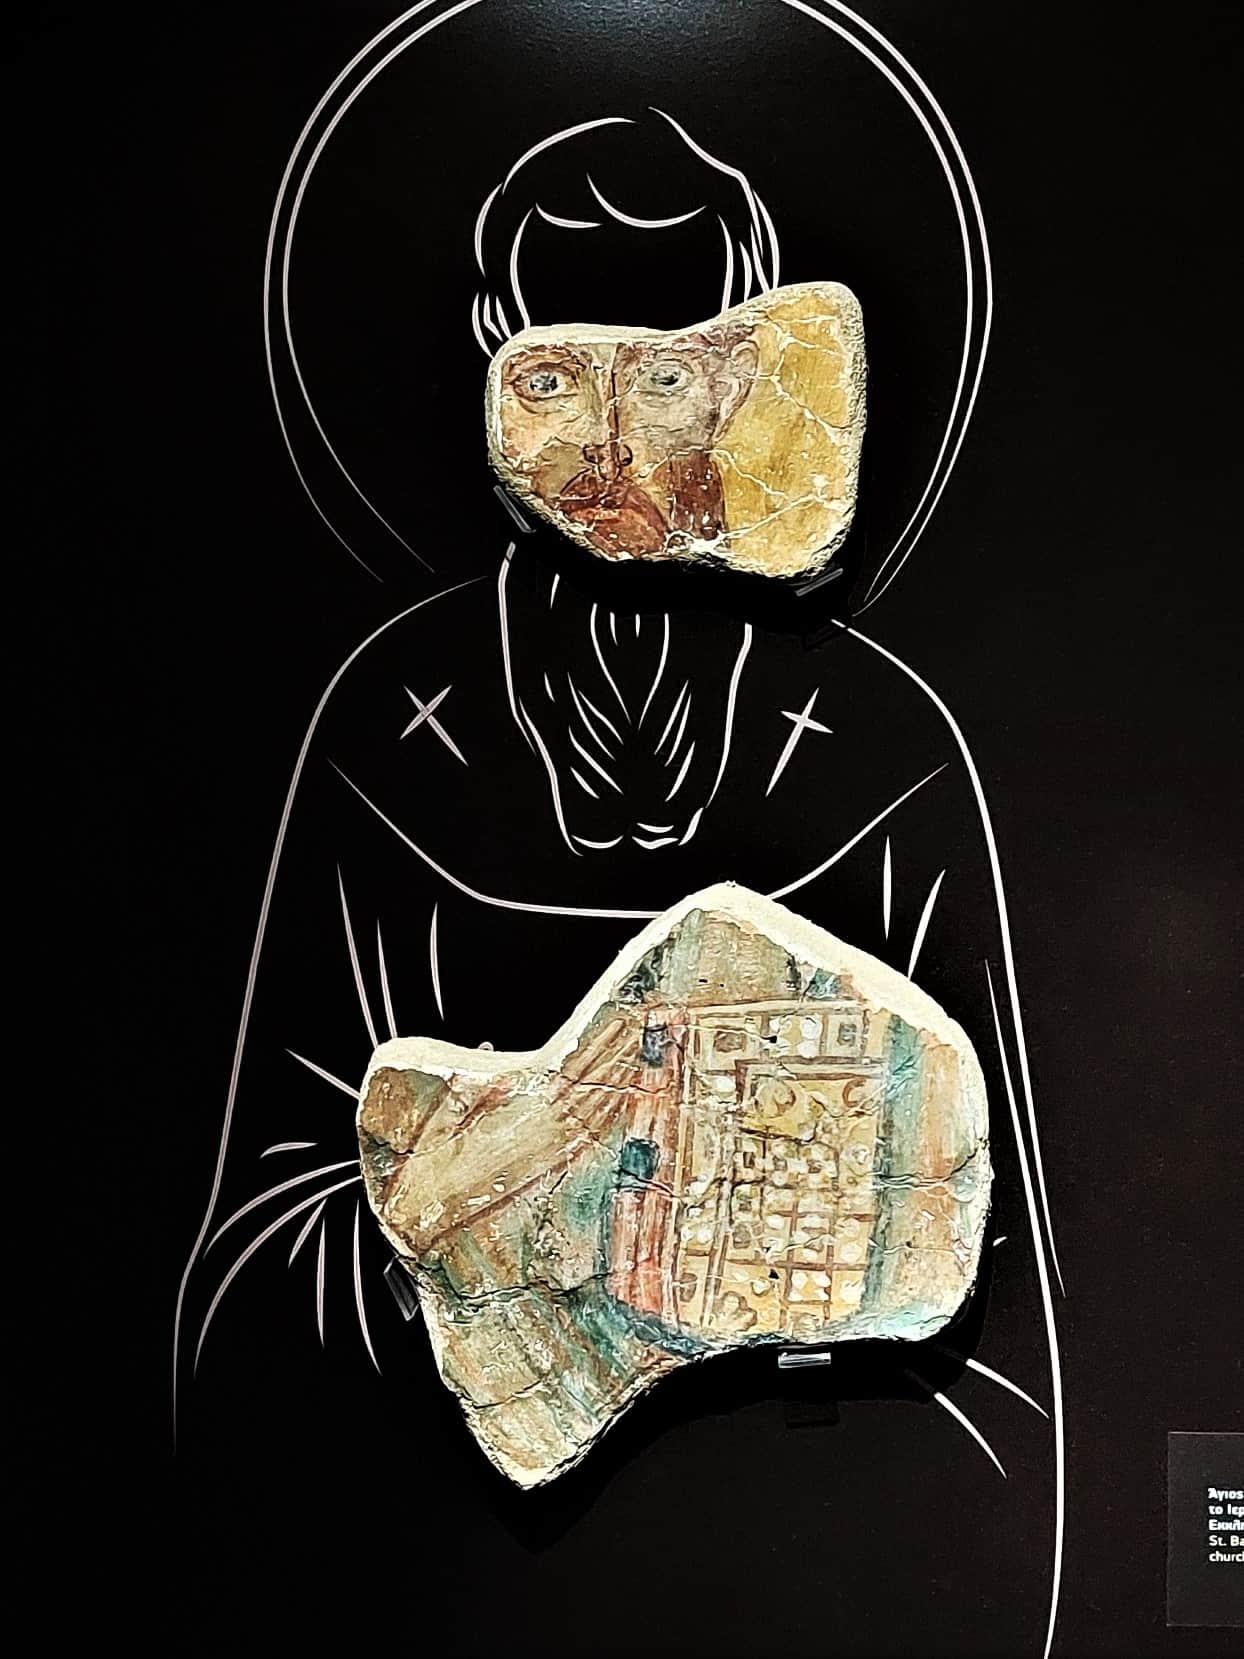 pieces of a wall fresco, showing a priest, complemented by the stylized drawing of the missing parts, Argos, Greece